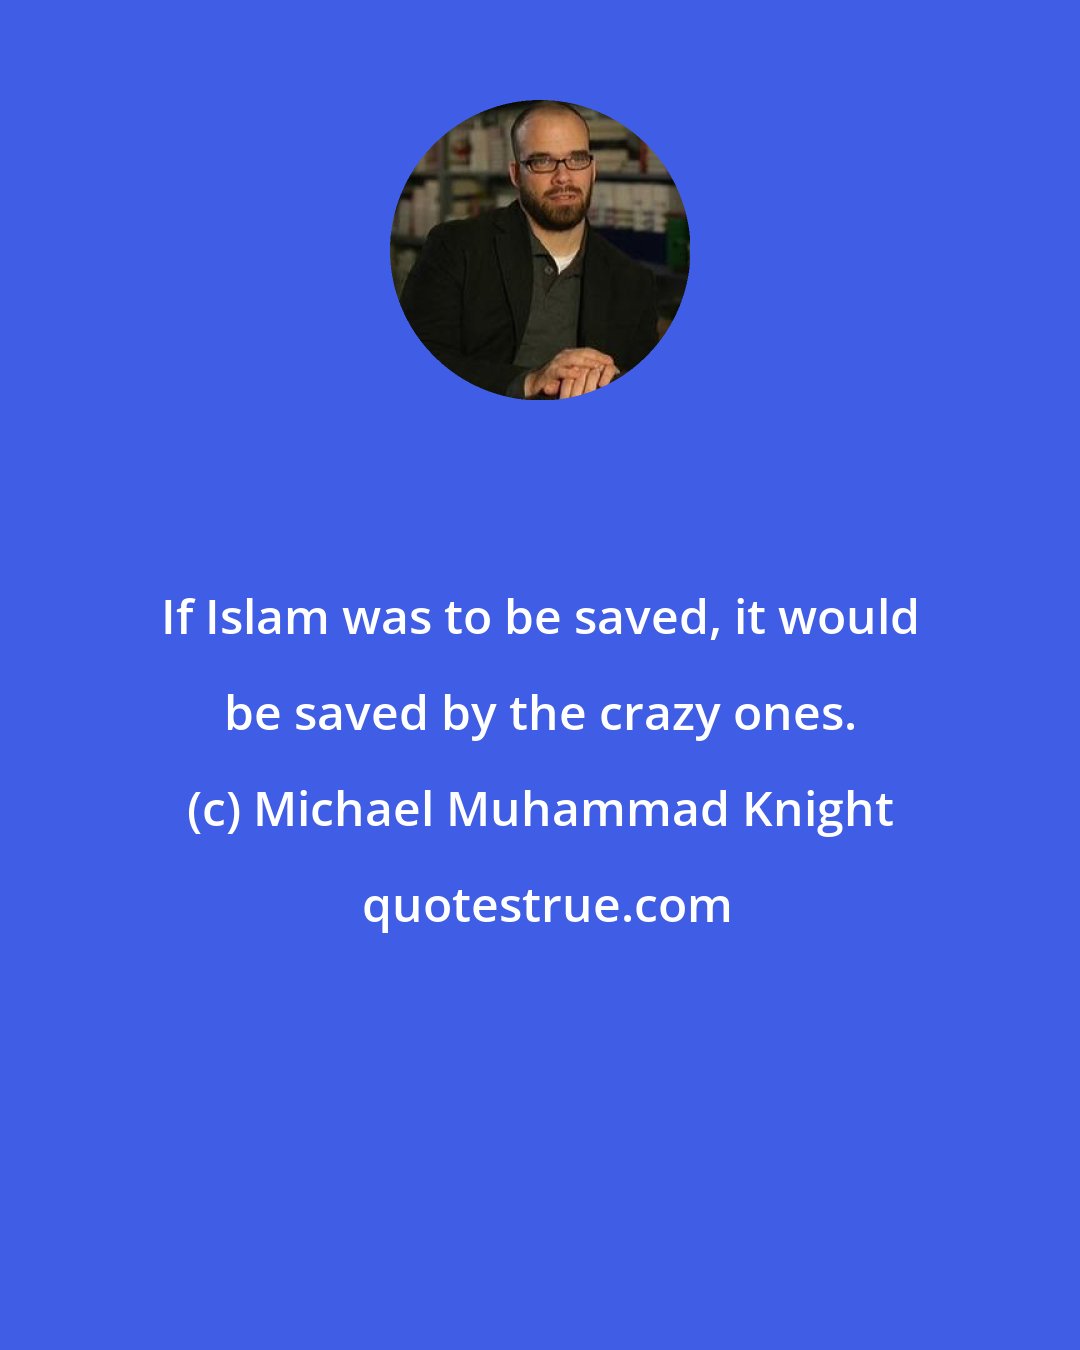 Michael Muhammad Knight: If Islam was to be saved, it would be saved by the crazy ones.